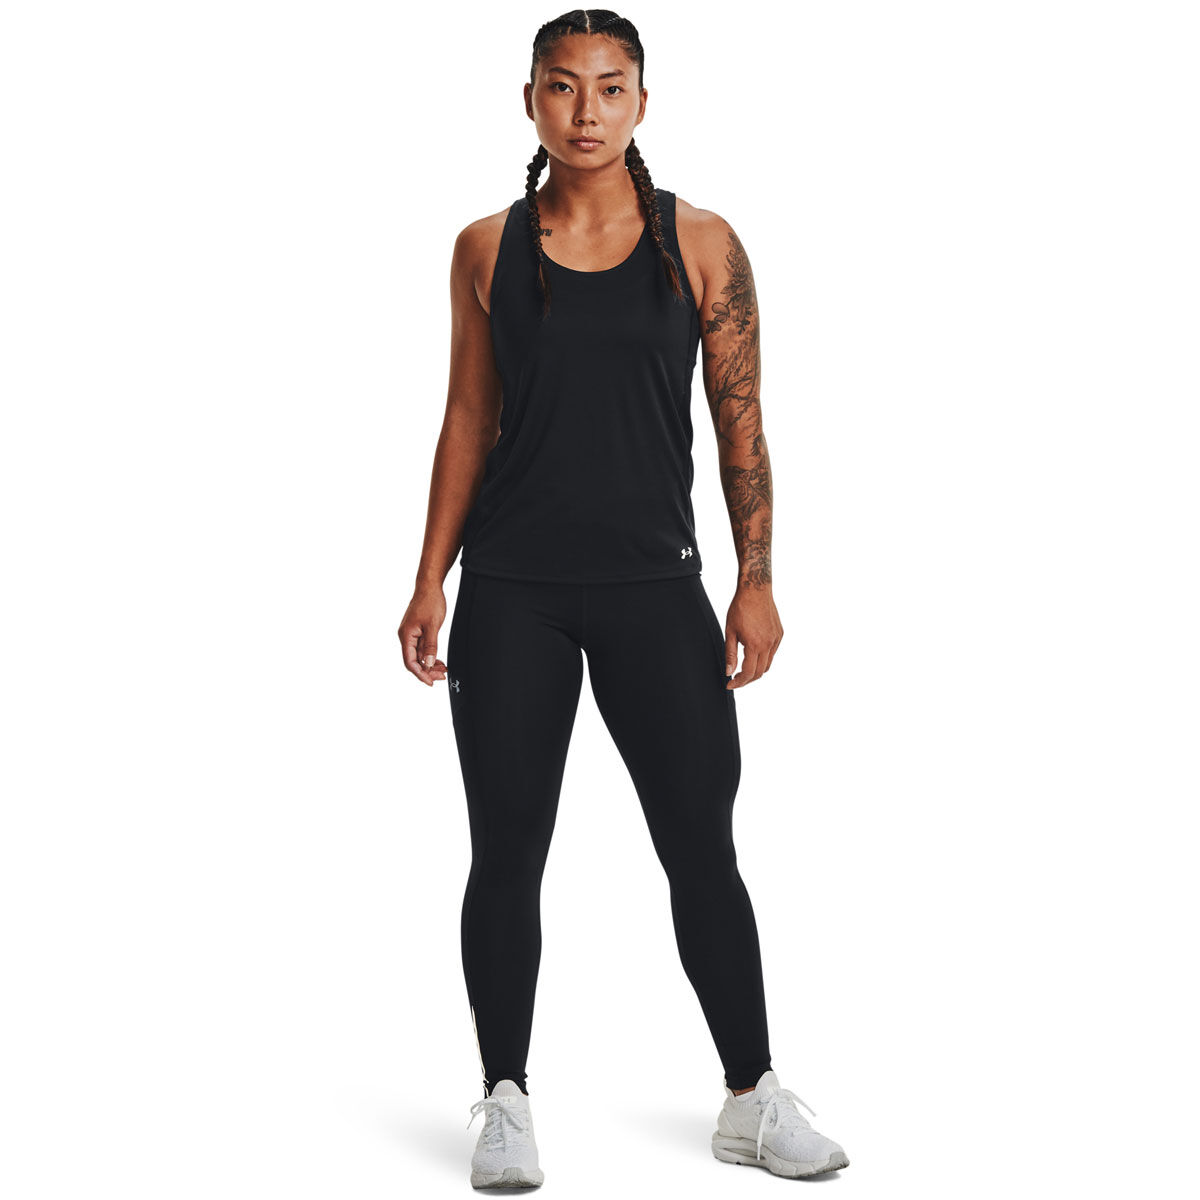 Under Armour Armour Fly Fast Tights for Ladies - Black/Black - L